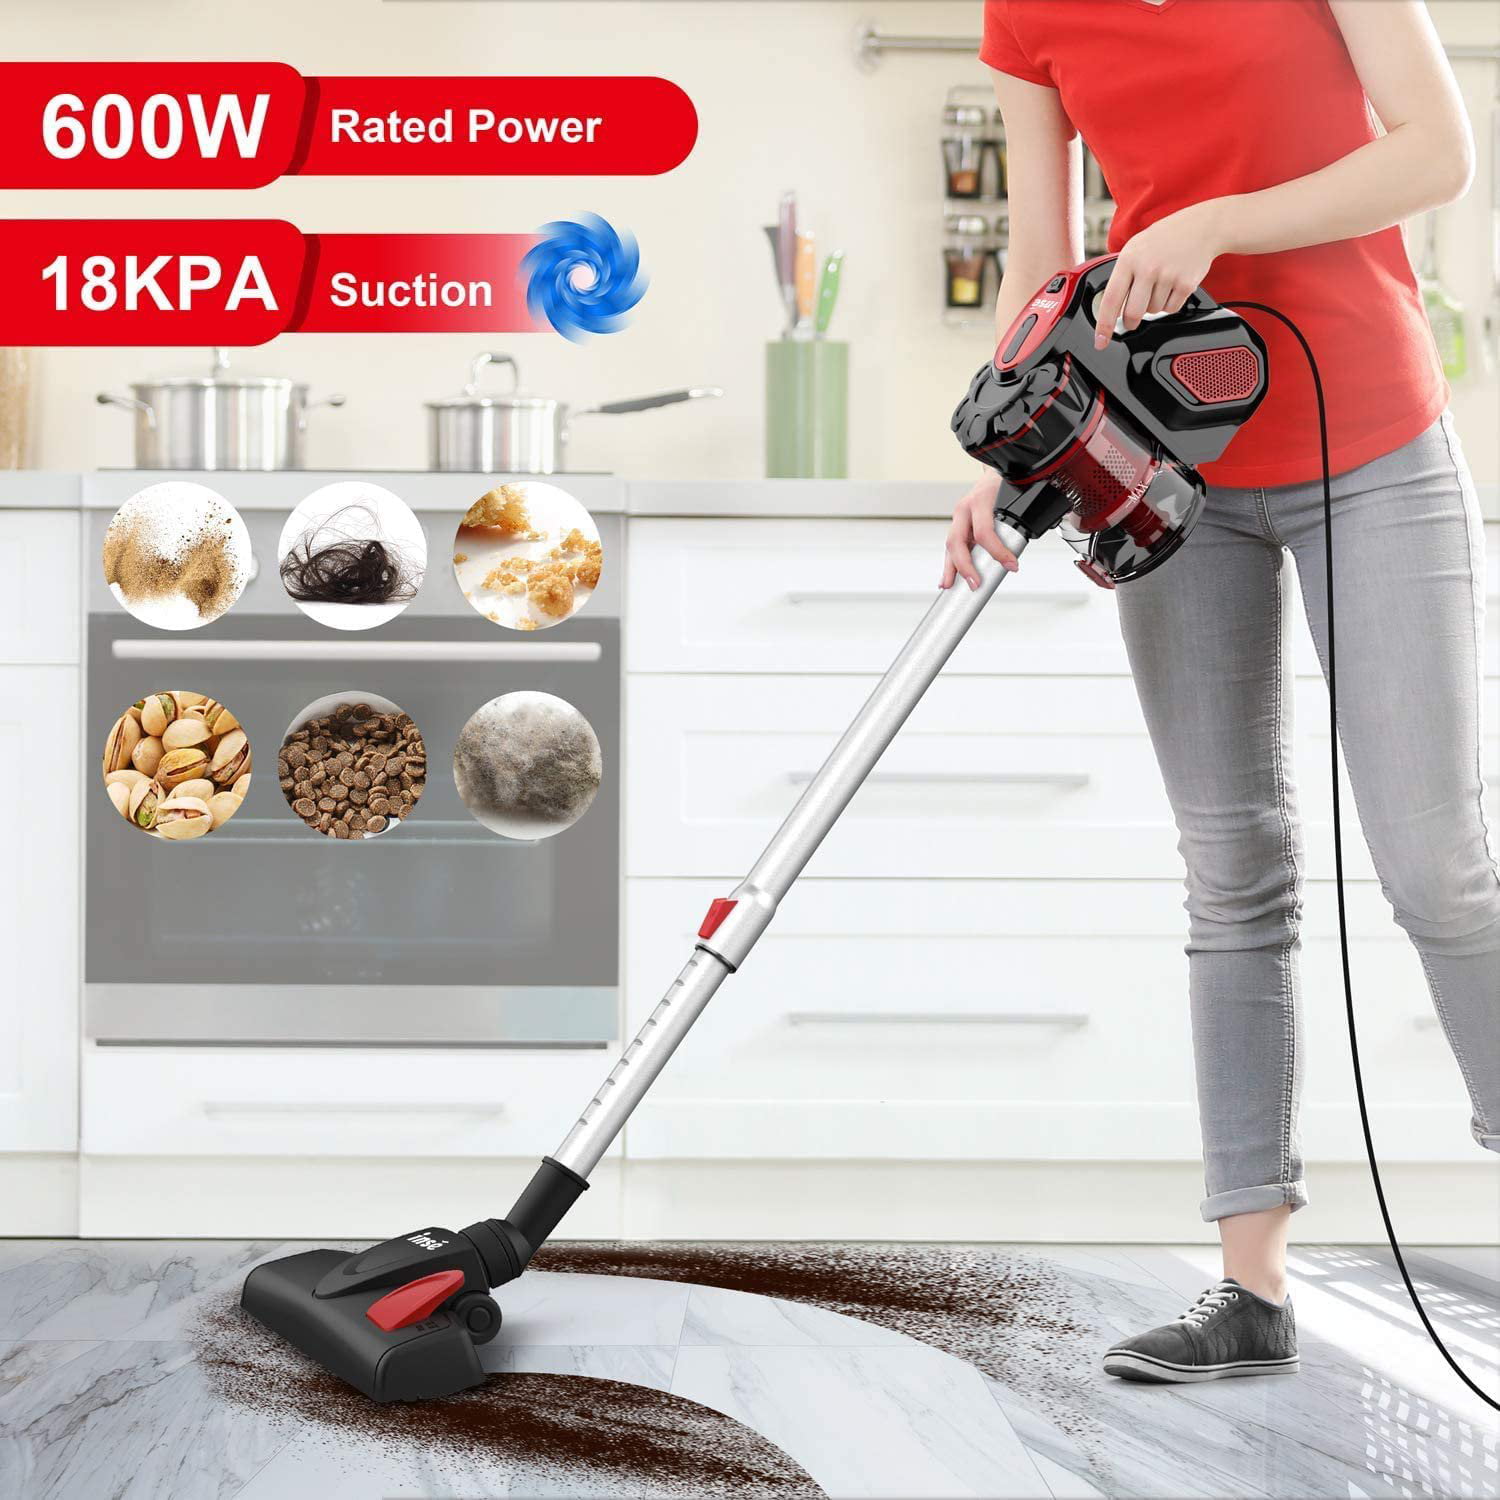 Corded Vacuum Cleaner, INSE Stick Vacuum Cleaner 18KPA Powerful Suction with 600W Motor, 3 in 1 Handheld Vacuum for Pet Hair Hard Floor Home - Red - 2